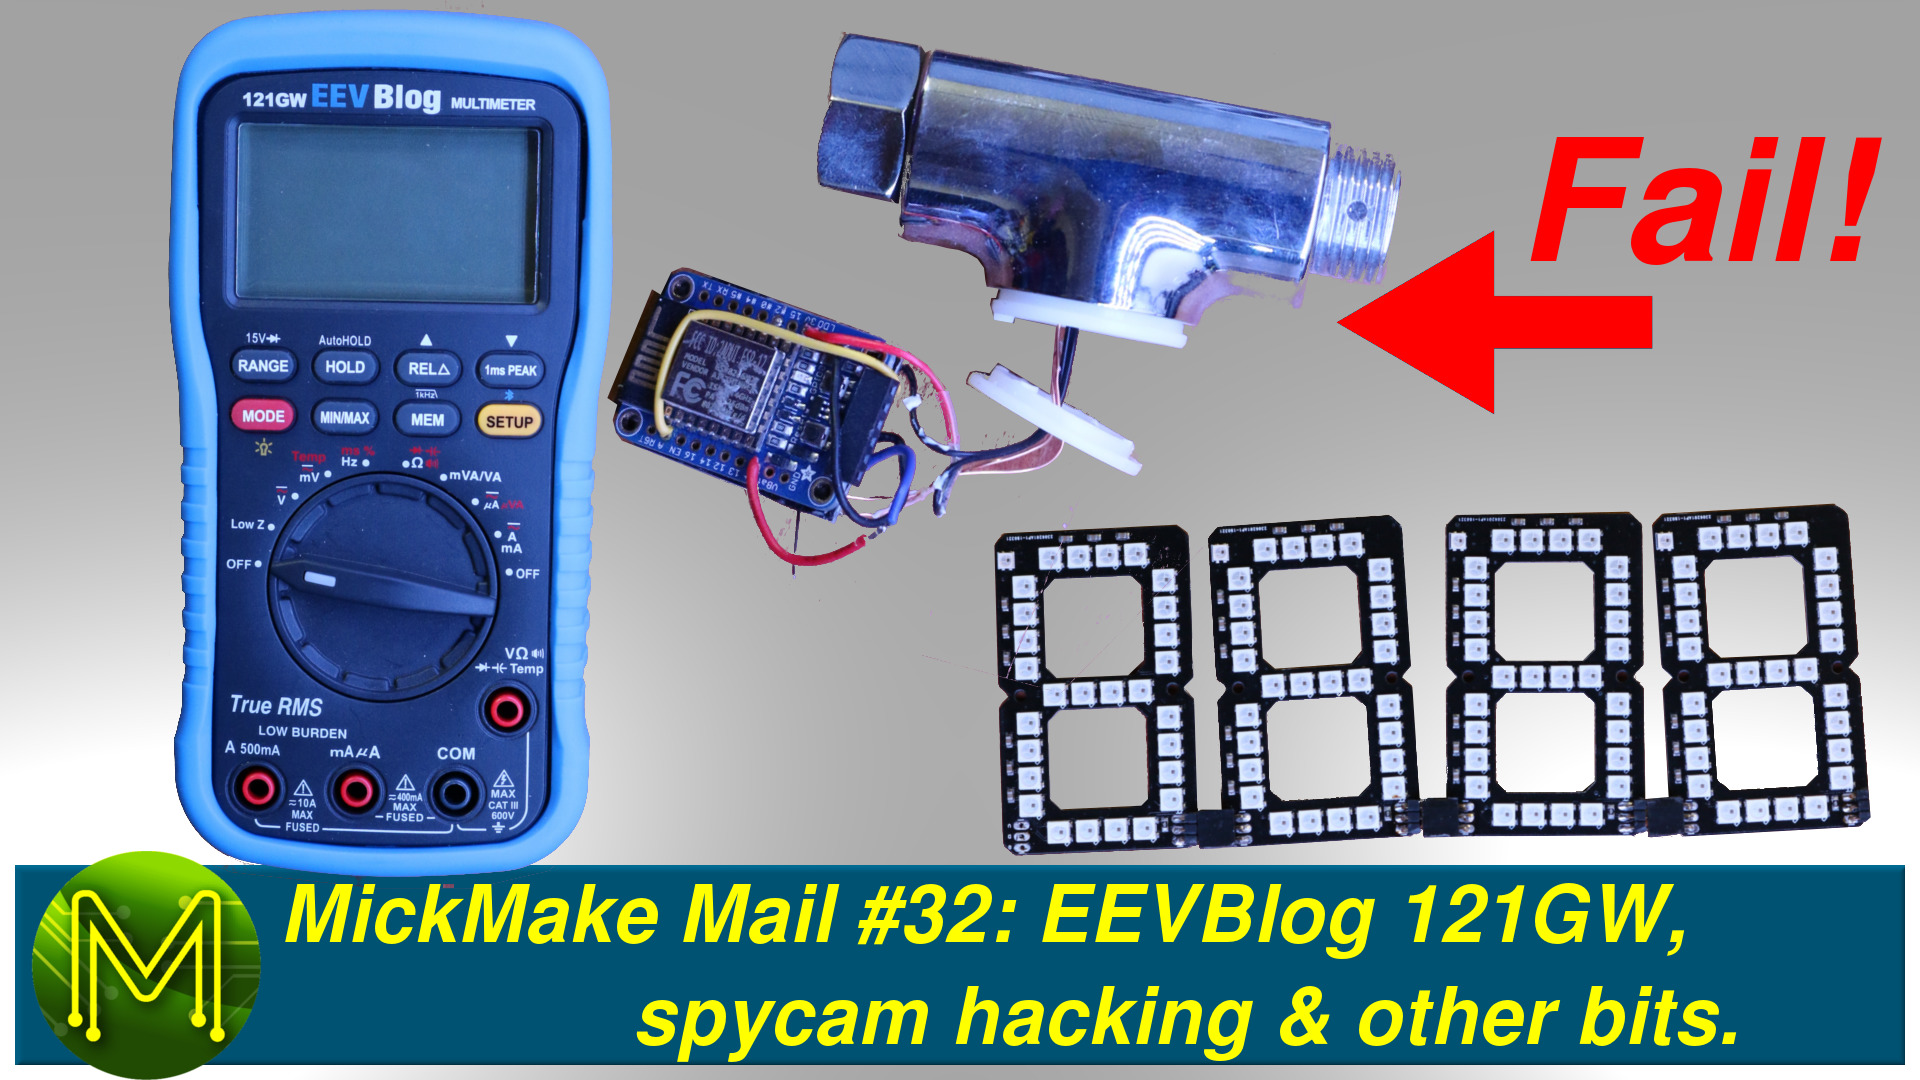 MickMake Mail #32: EEVBlog 121GW, spycam hacking and other bits.